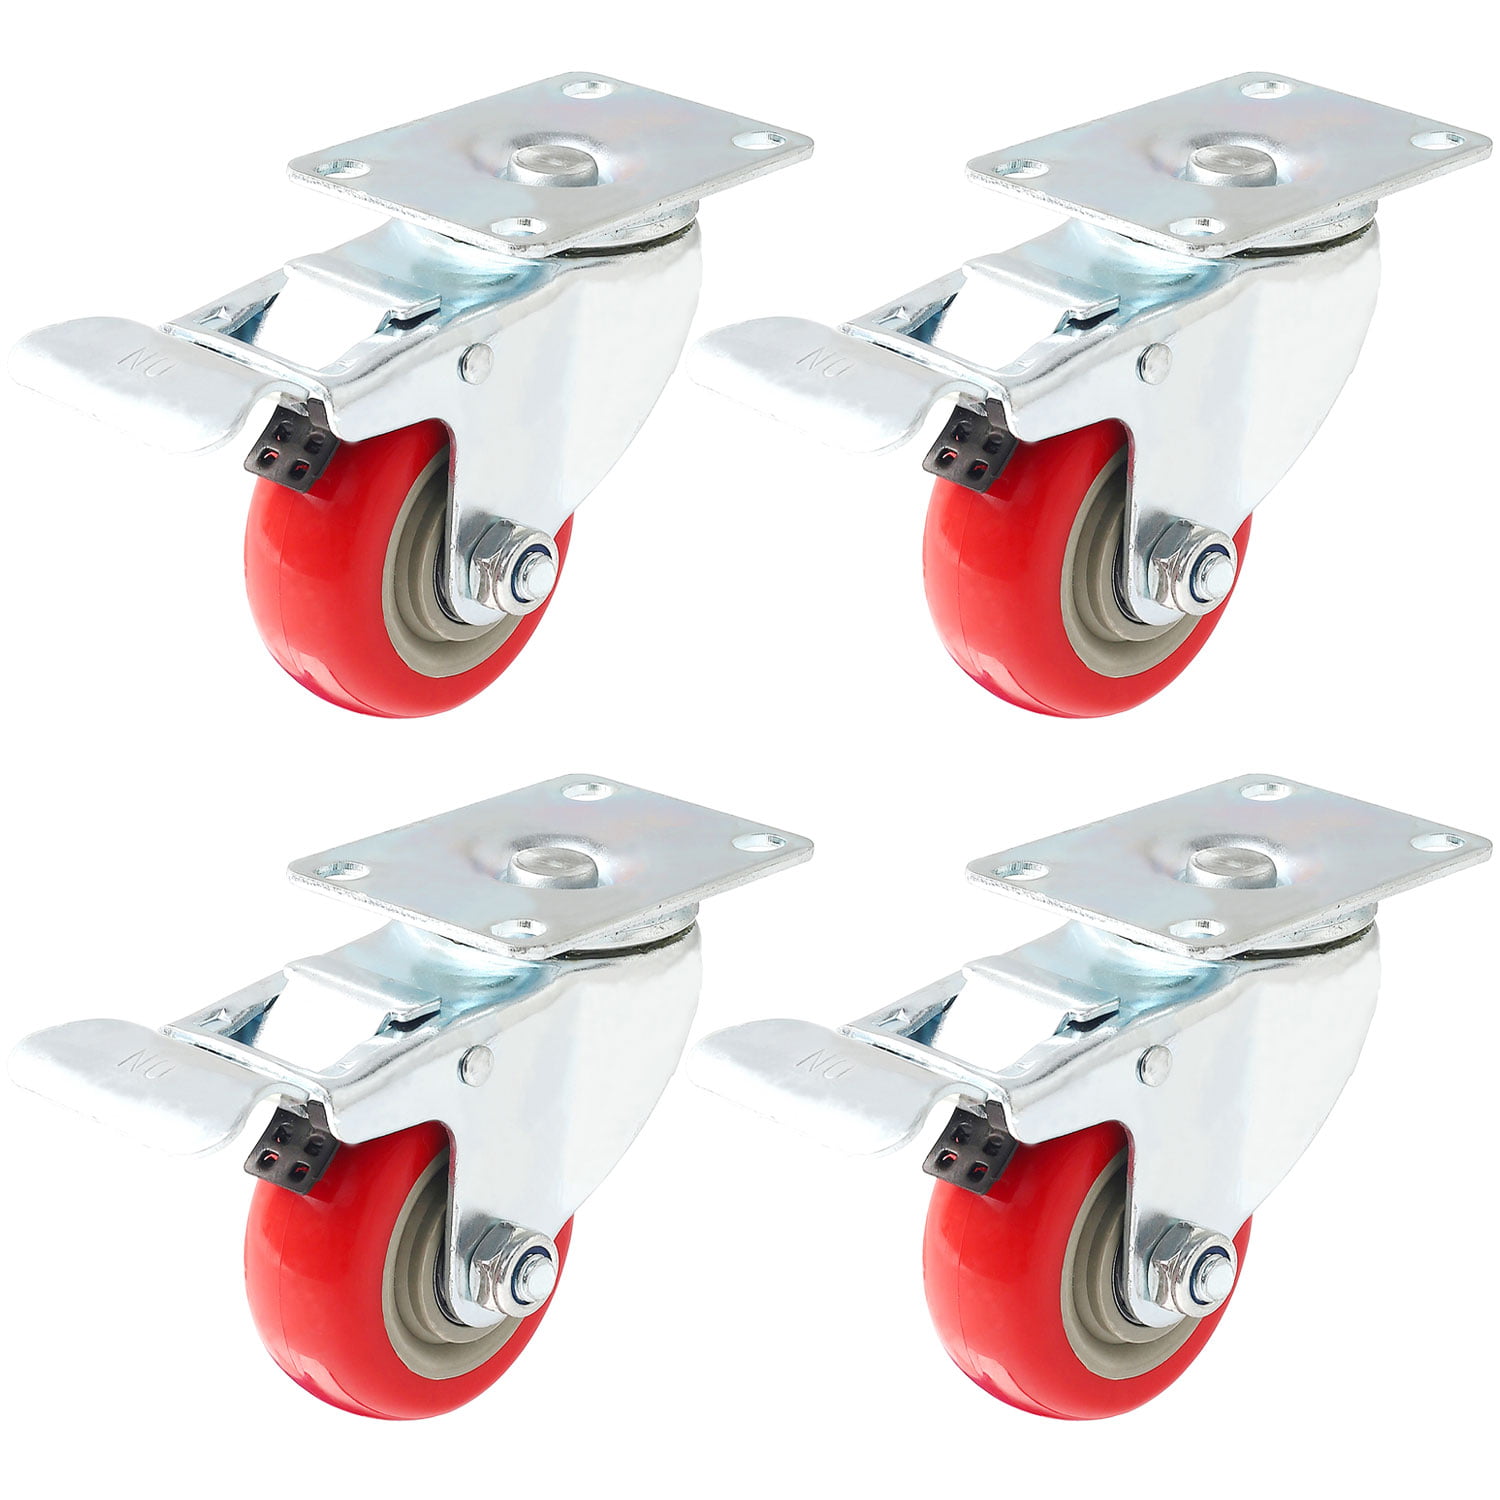 Color : Brake, Size : 75mm/3inch Hhhong Red Moving Caster Wheels,Heavy Duty Swivel Wheels for Furniture,Trolley Wheels in Polyurethane,Castor Wheels with Plate,Load Bearing 180kg,4Pcs